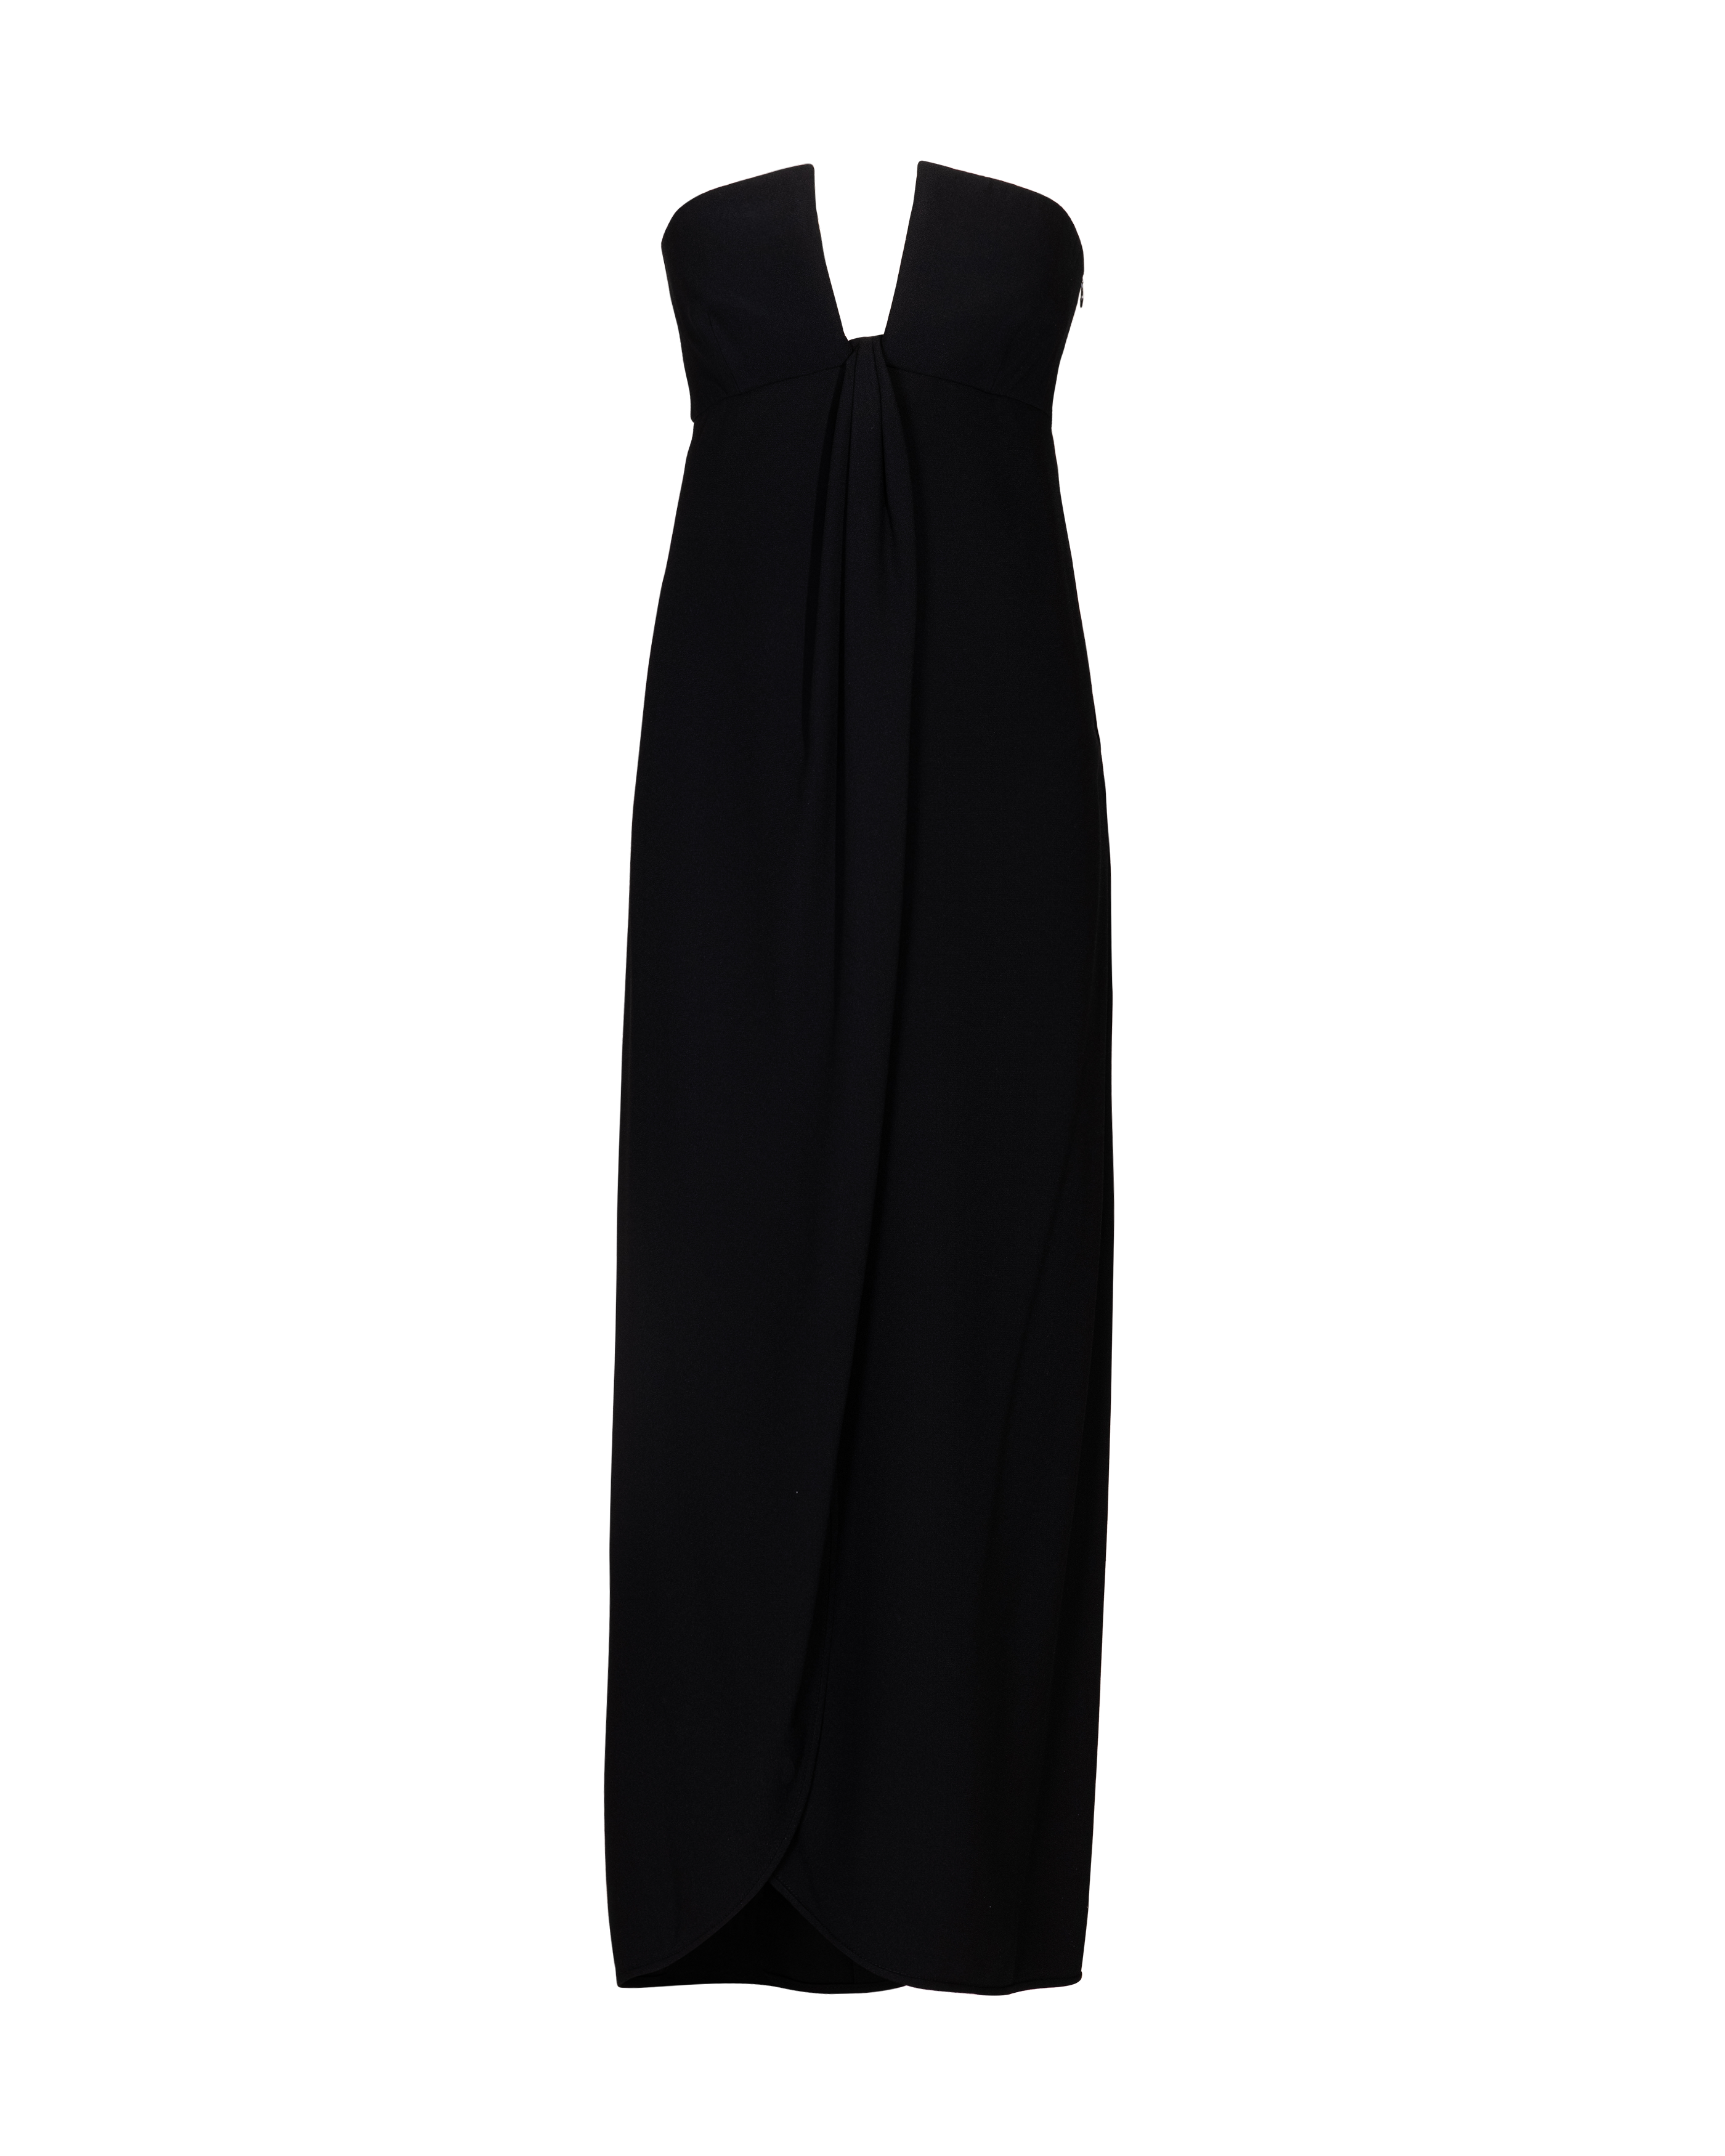 S/S 2000 Black Strapless Gown with Open Bust